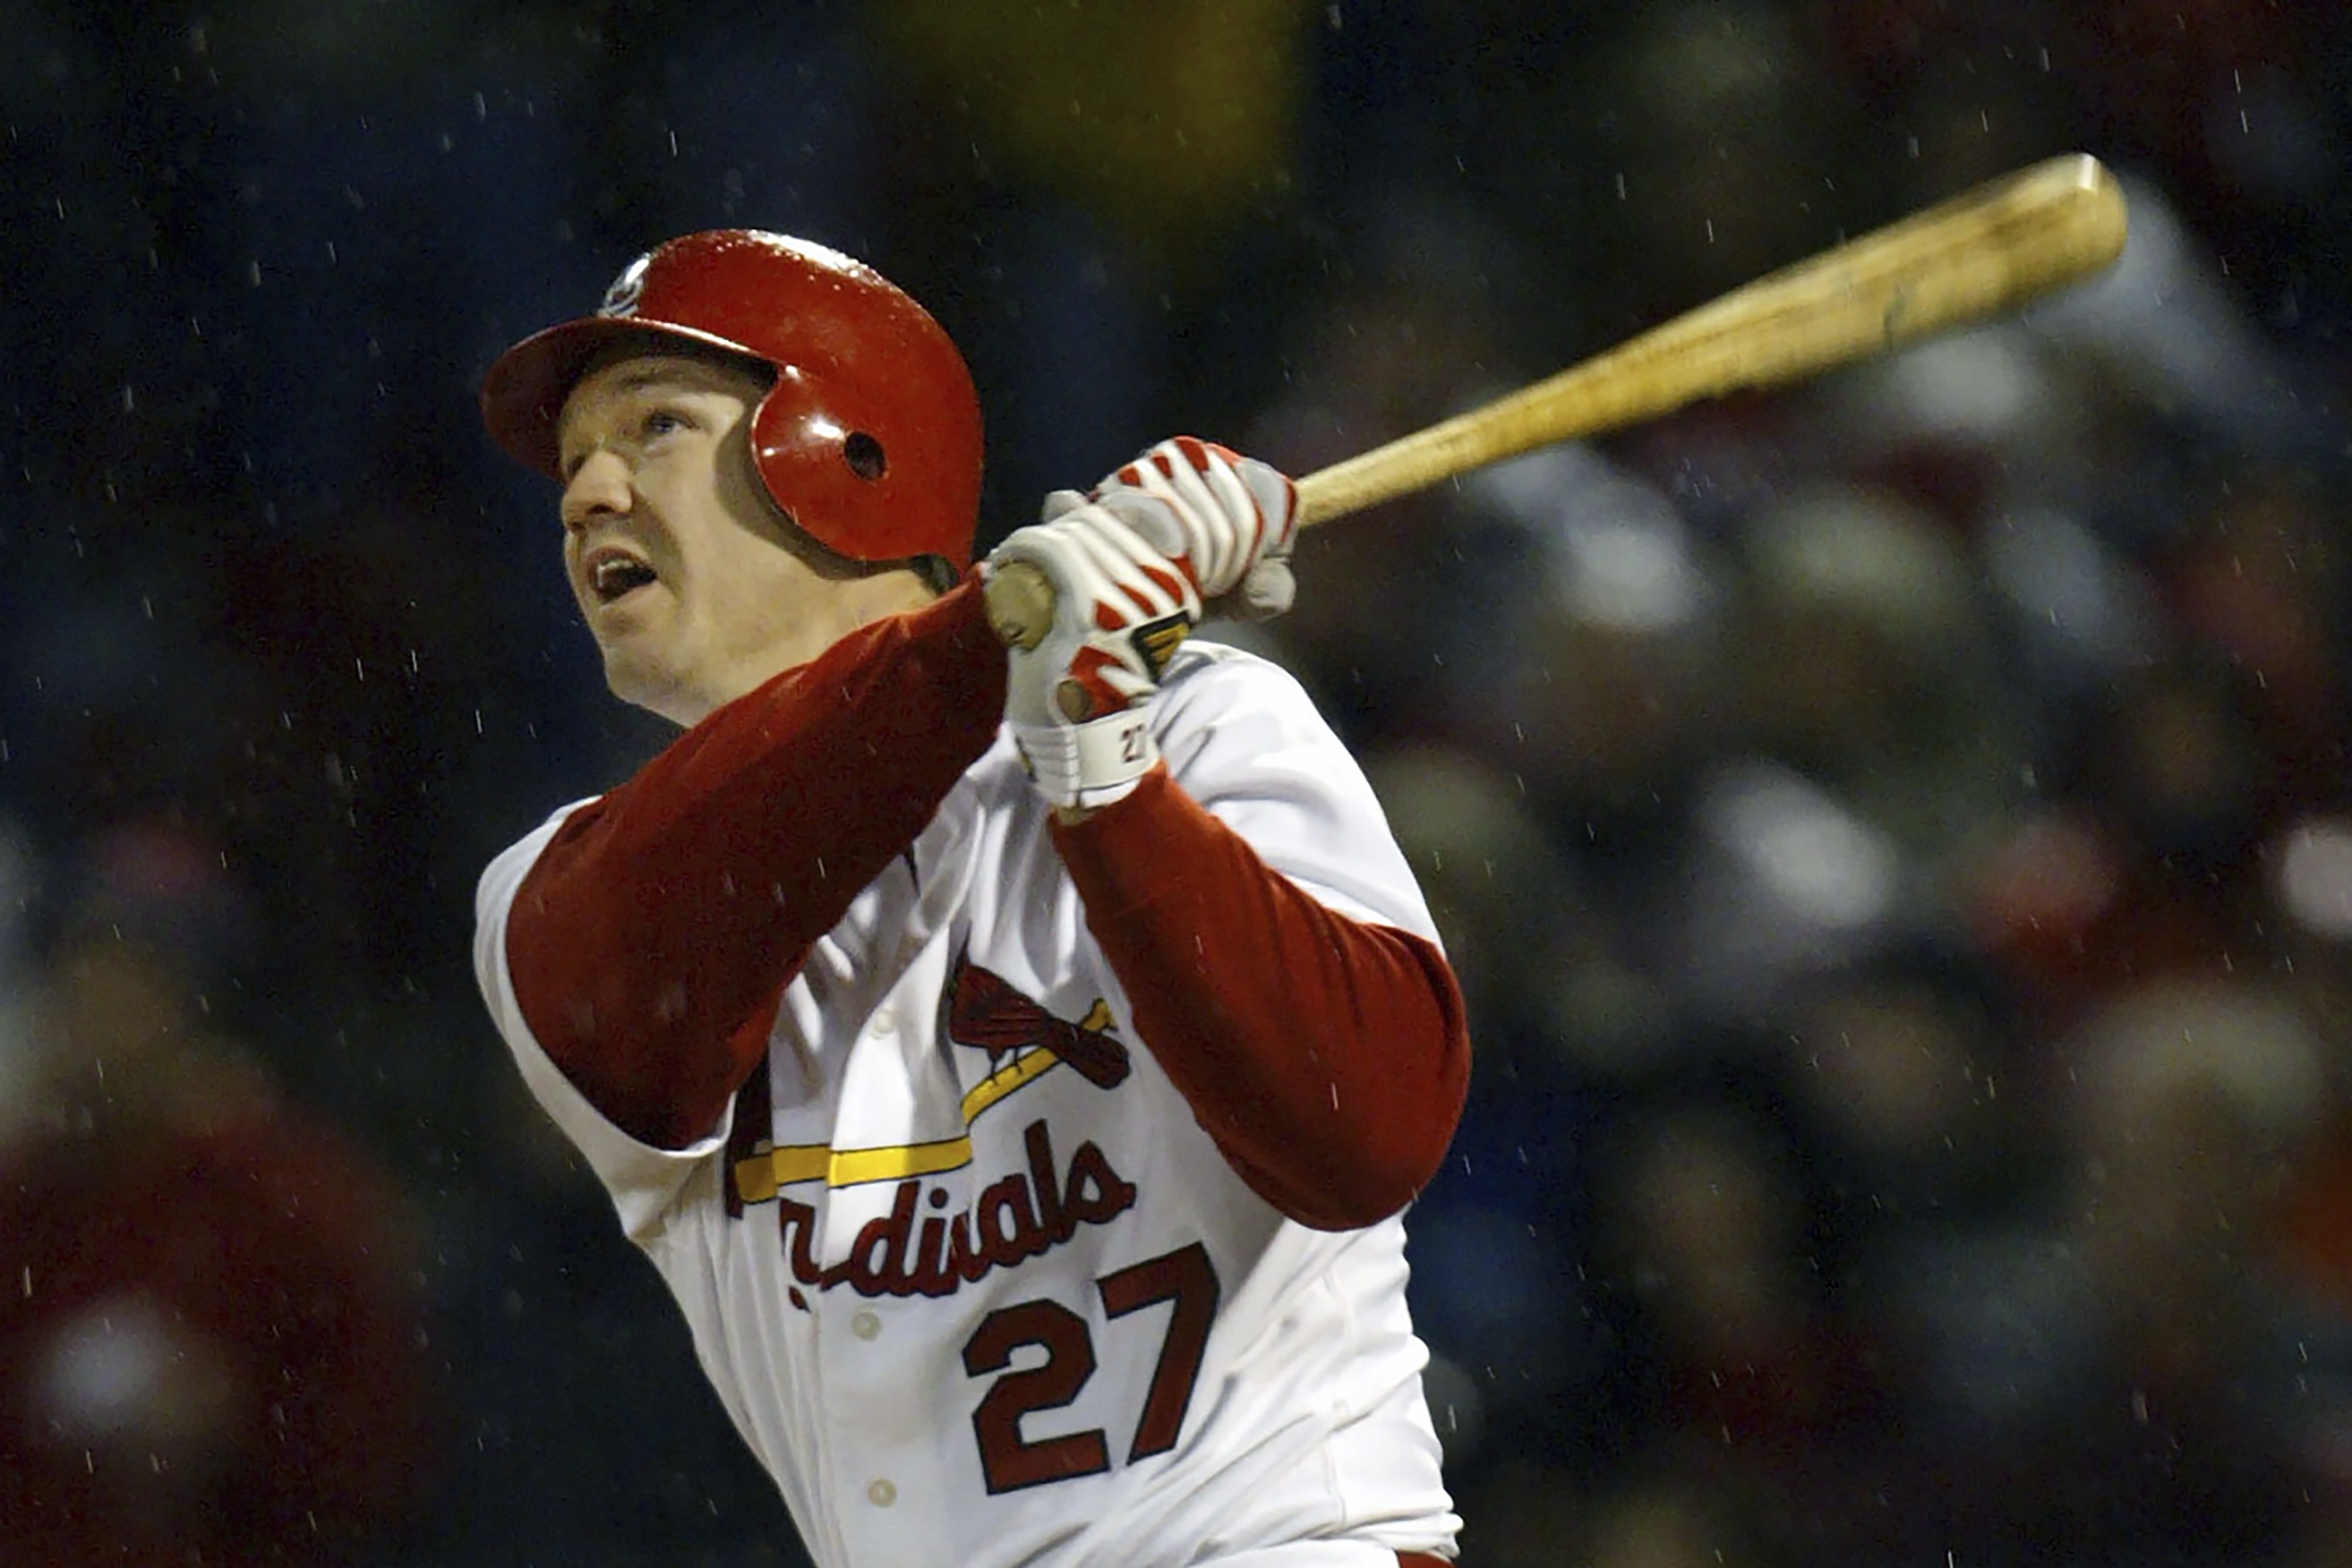 Rolen could become just 18th third baseman in Hall of Fame